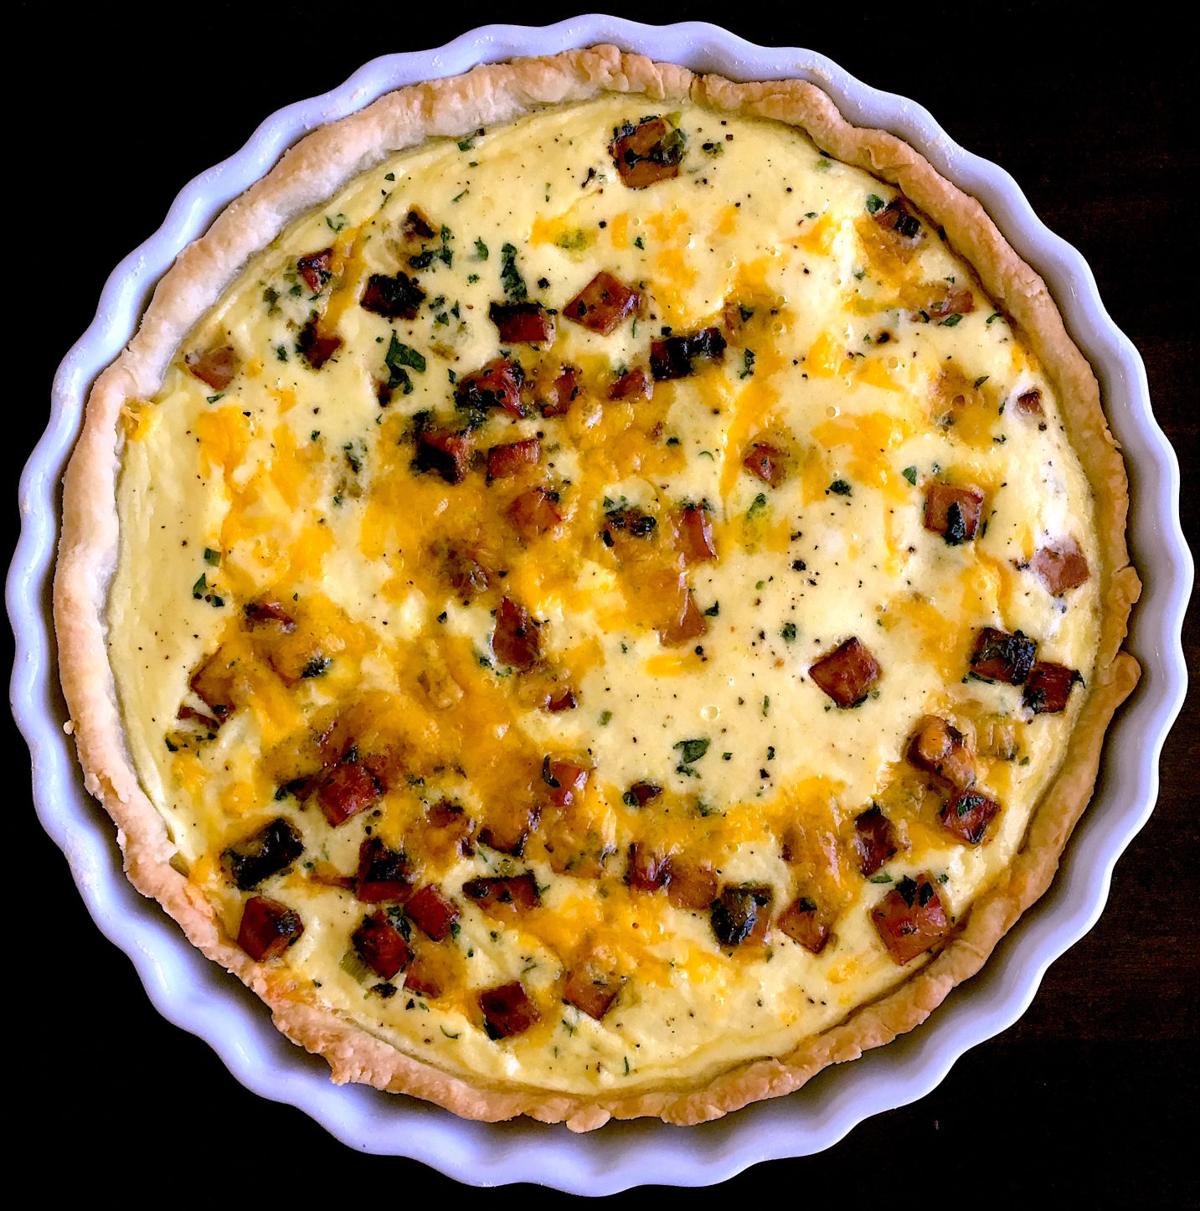 Quiche is a make-ahead dish perfect for brunch | Kelly Anthony ...